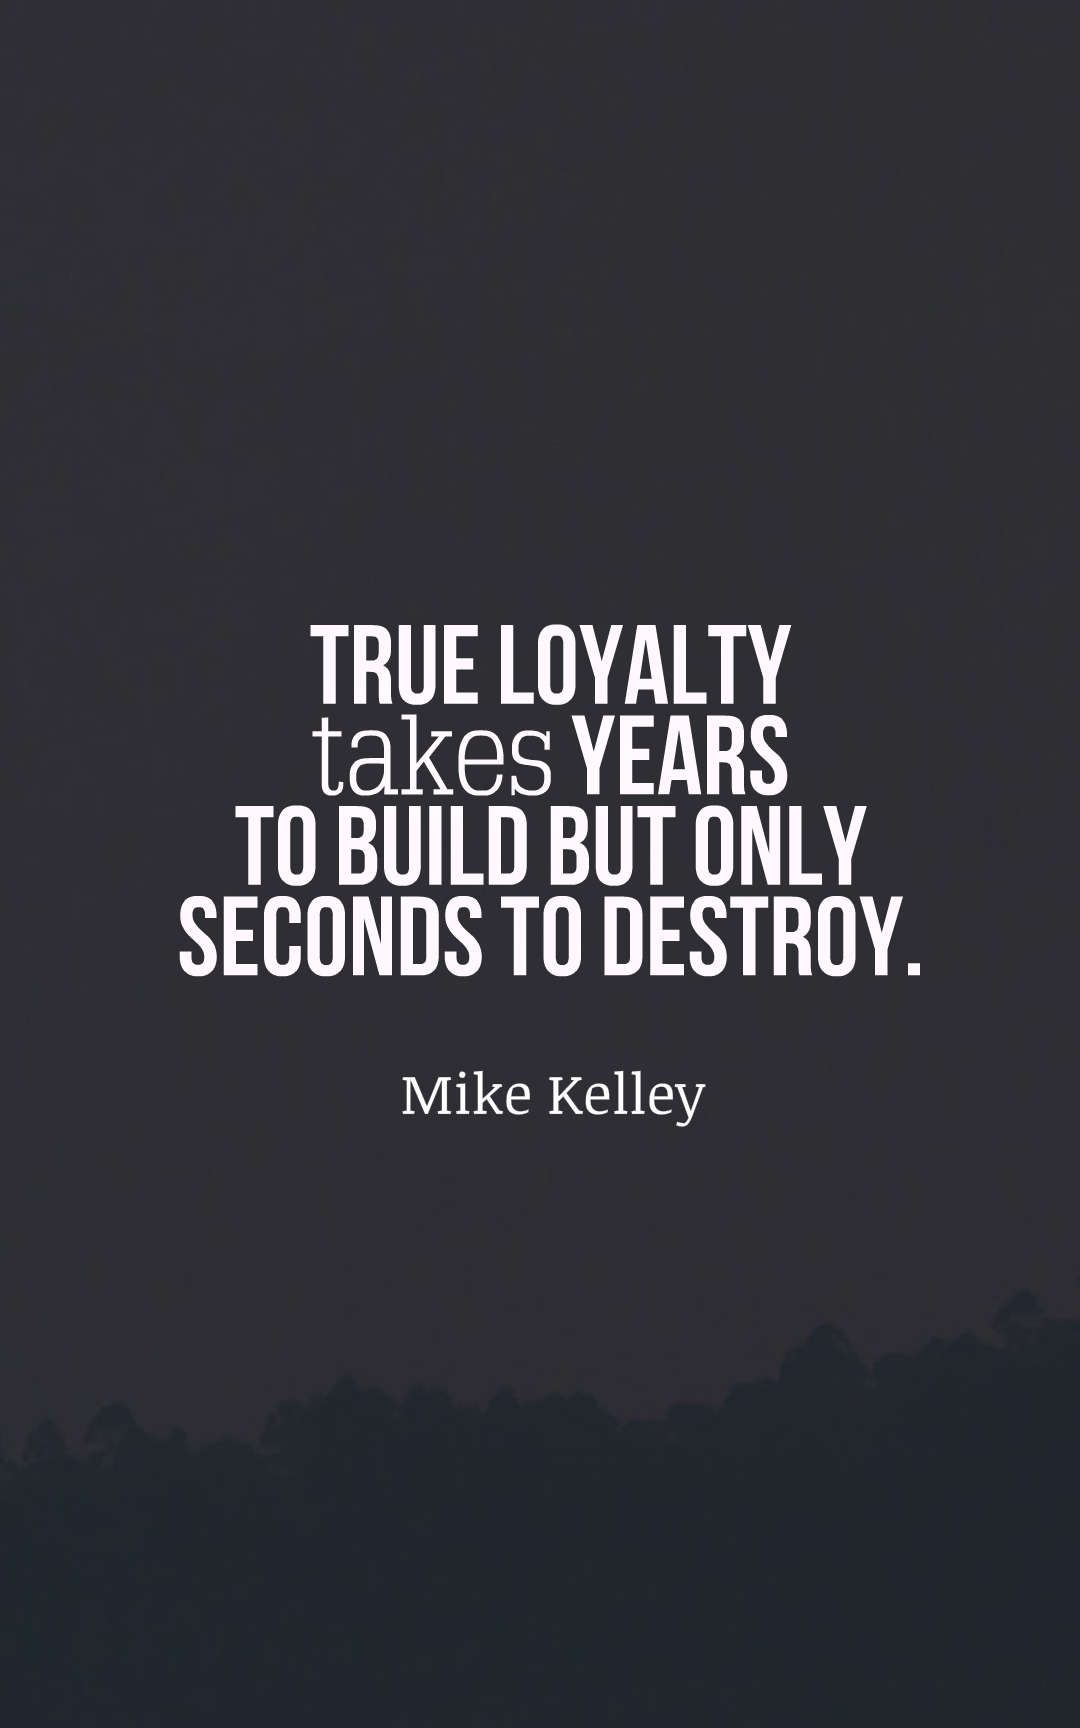 true loyalty takes years to build but only seconds to destroy.